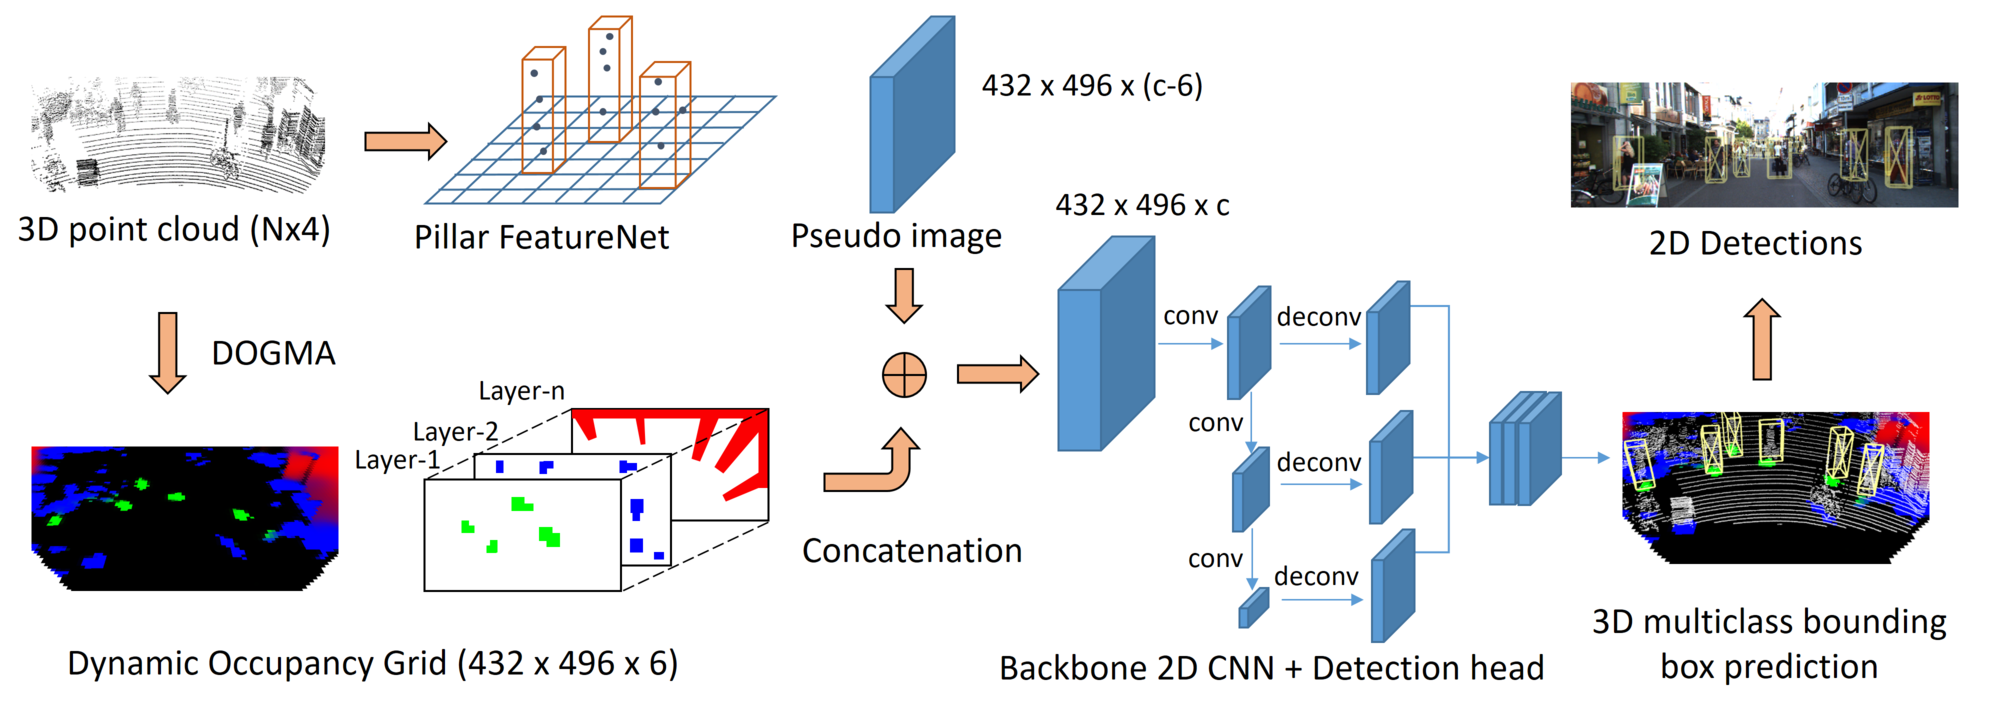 Overview of the proposed experimental architecture for 3D object detection 